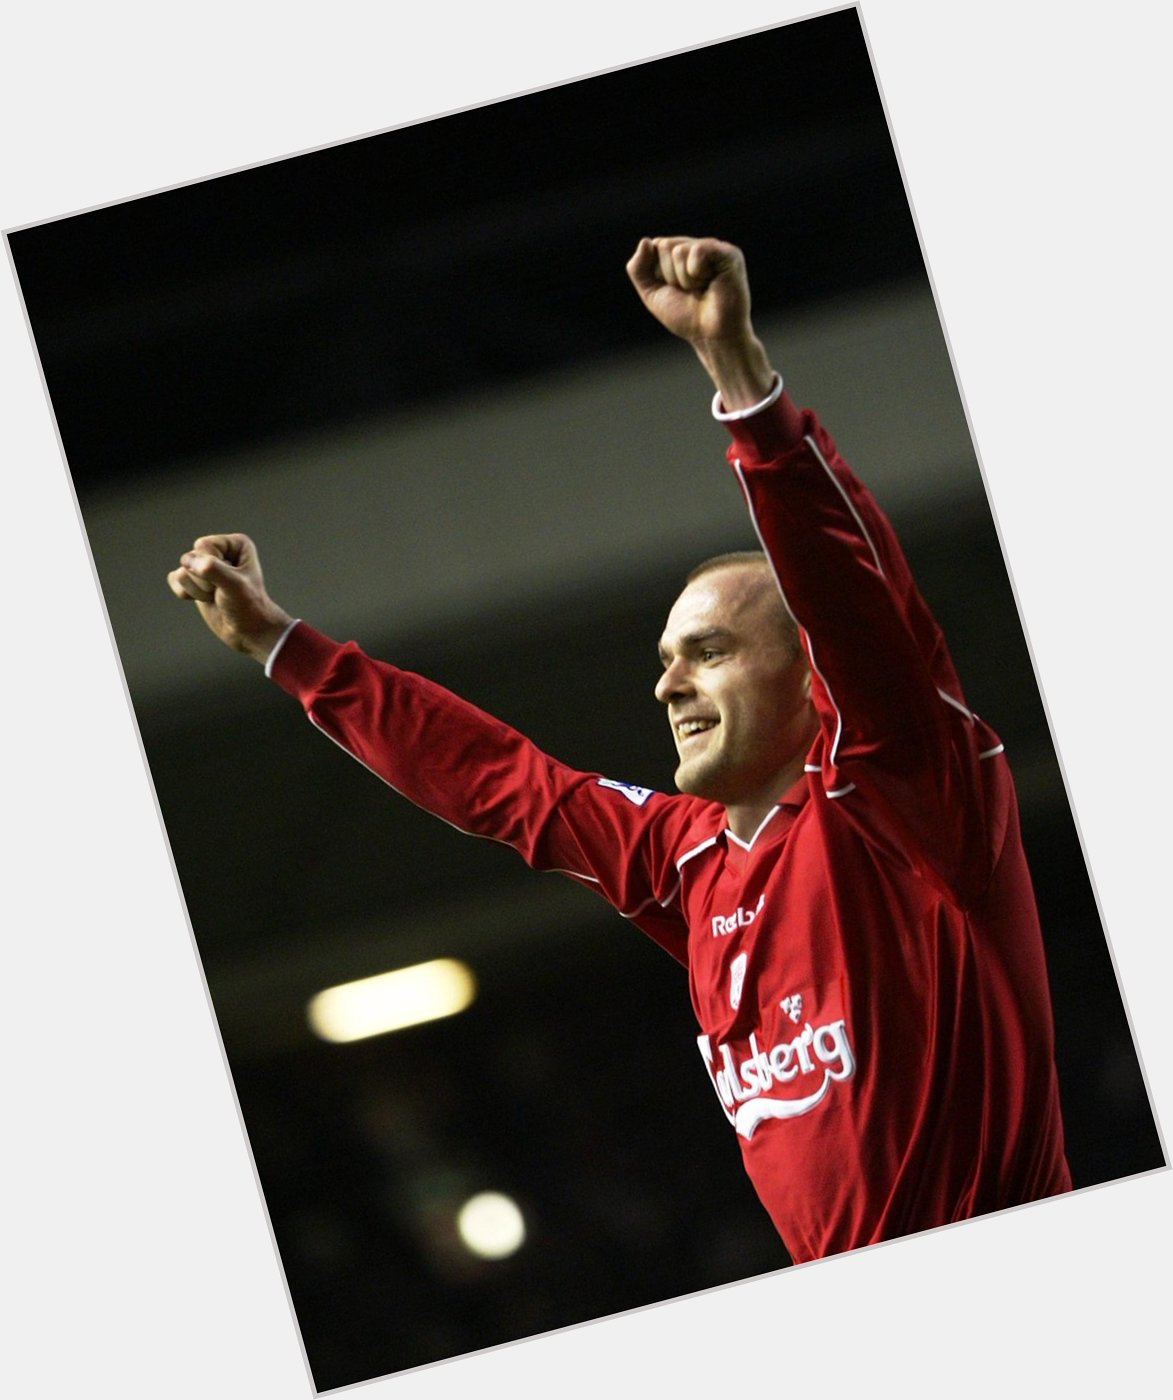 Happy birthday to ex- midfielder Danny Murphy, who turns 38 today. He scored 44 goals for the Reds in 249 apps 